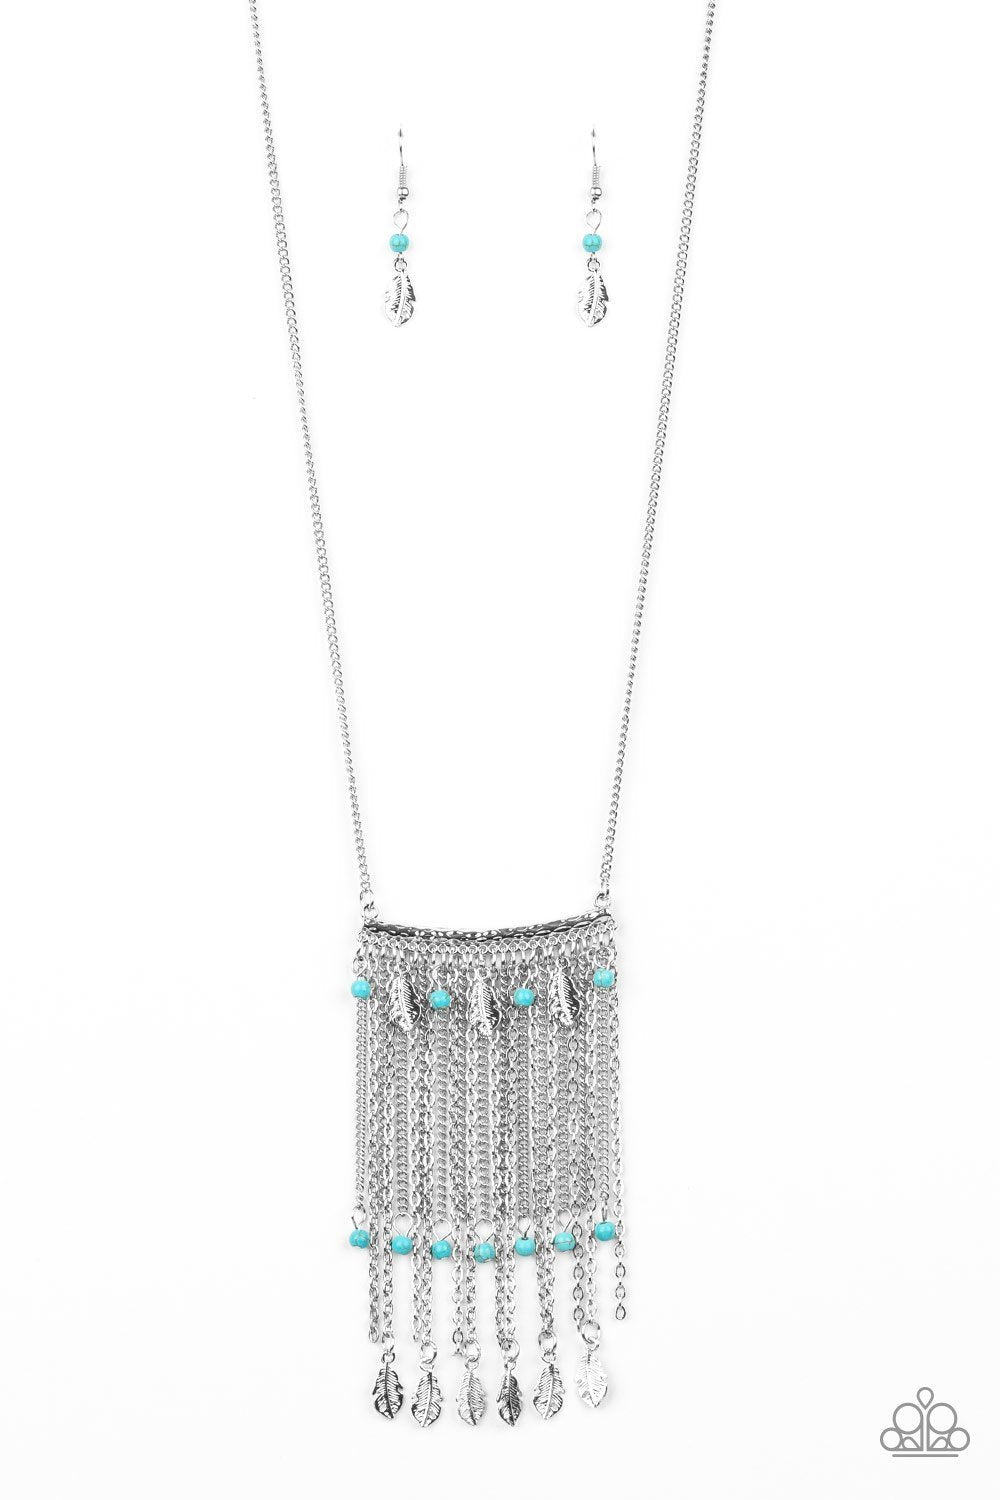 On The Fly Turquoise Blue Stone and Silver Feather Necklace - Paparazzi Accessories-CarasShop.com - $5 Jewelry by Cara Jewels